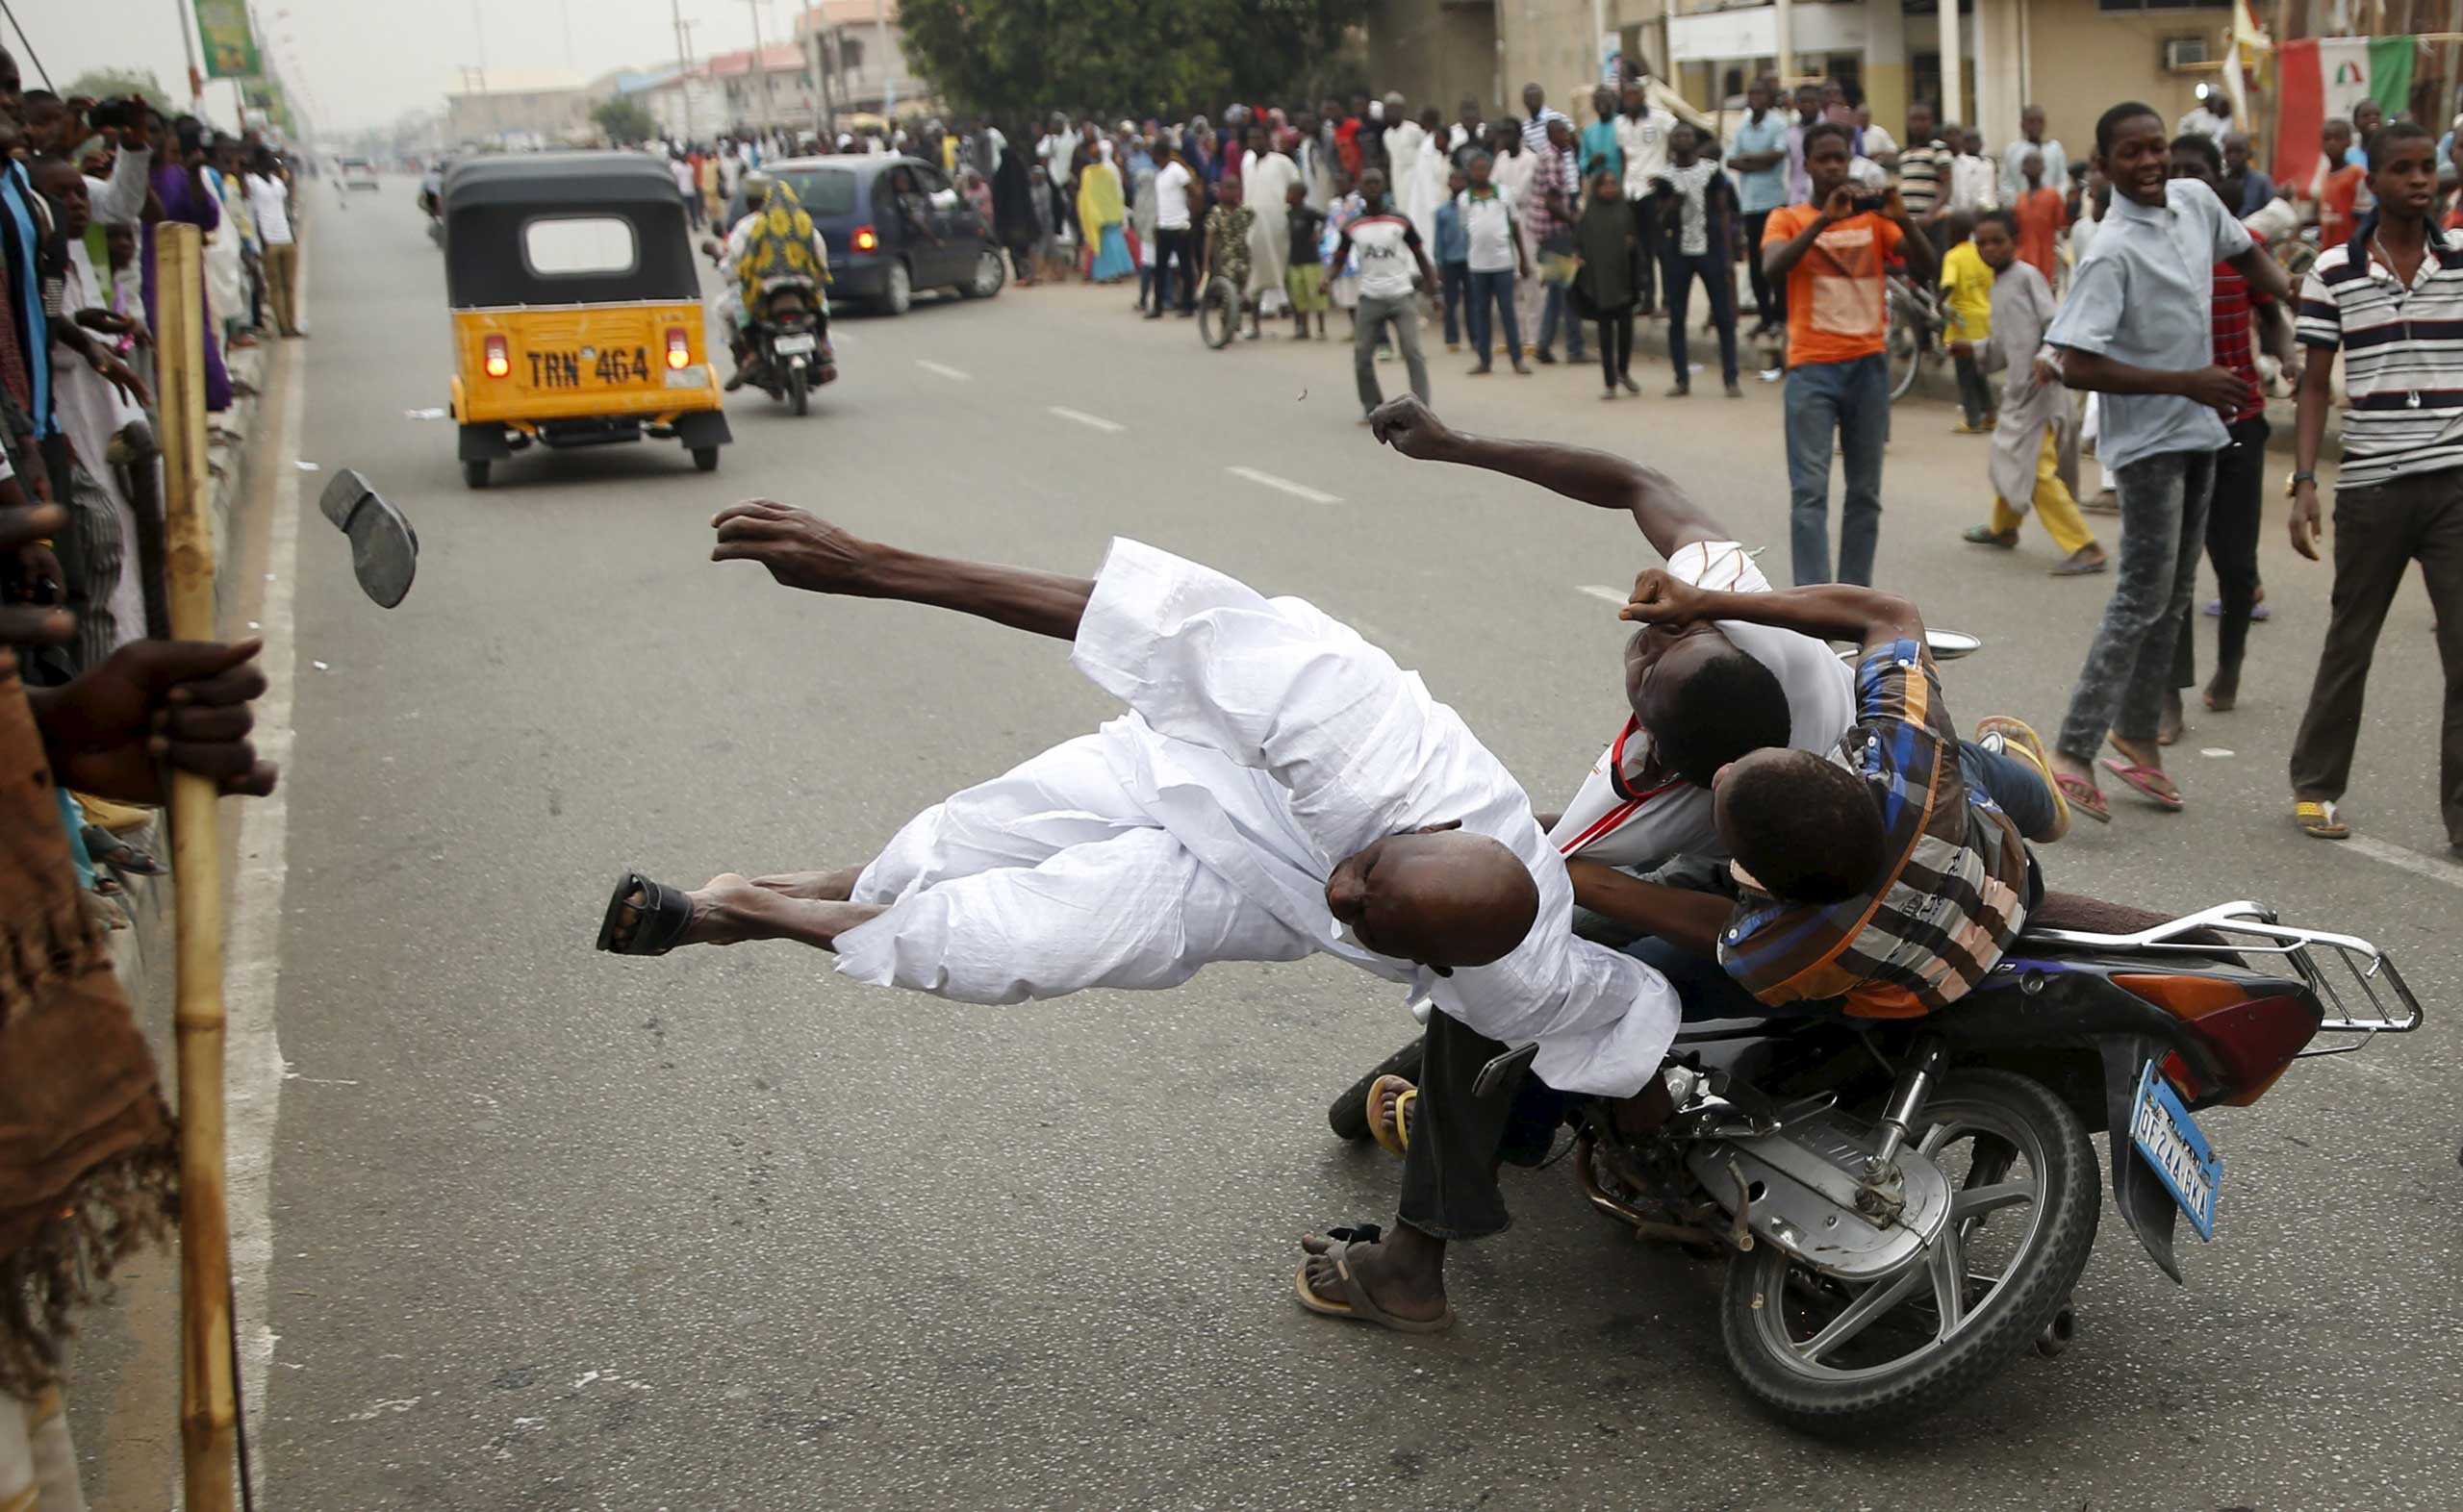 Goran Tomasevic: 
                               I was in Kano, northern Nigeria, on assignment covering the presidential elections. When the results were announced of Muhammadu Buhari’s victory, large crowds started celebrating on the streets.
                              The man in the picture was accidentally hit by a motorcyclist driving at full speed as he was standing by the side of the road. He fell to the ground and didn’t move or respond to others. He was quickly driven to a hospital. I think he died but I am not sure. 
                              I felt very sorry for this man. He was in the streets clearly celebrating a very important moment for him when this happened. 
                              
                              This photo was taken in Kano on March 31, 2015.